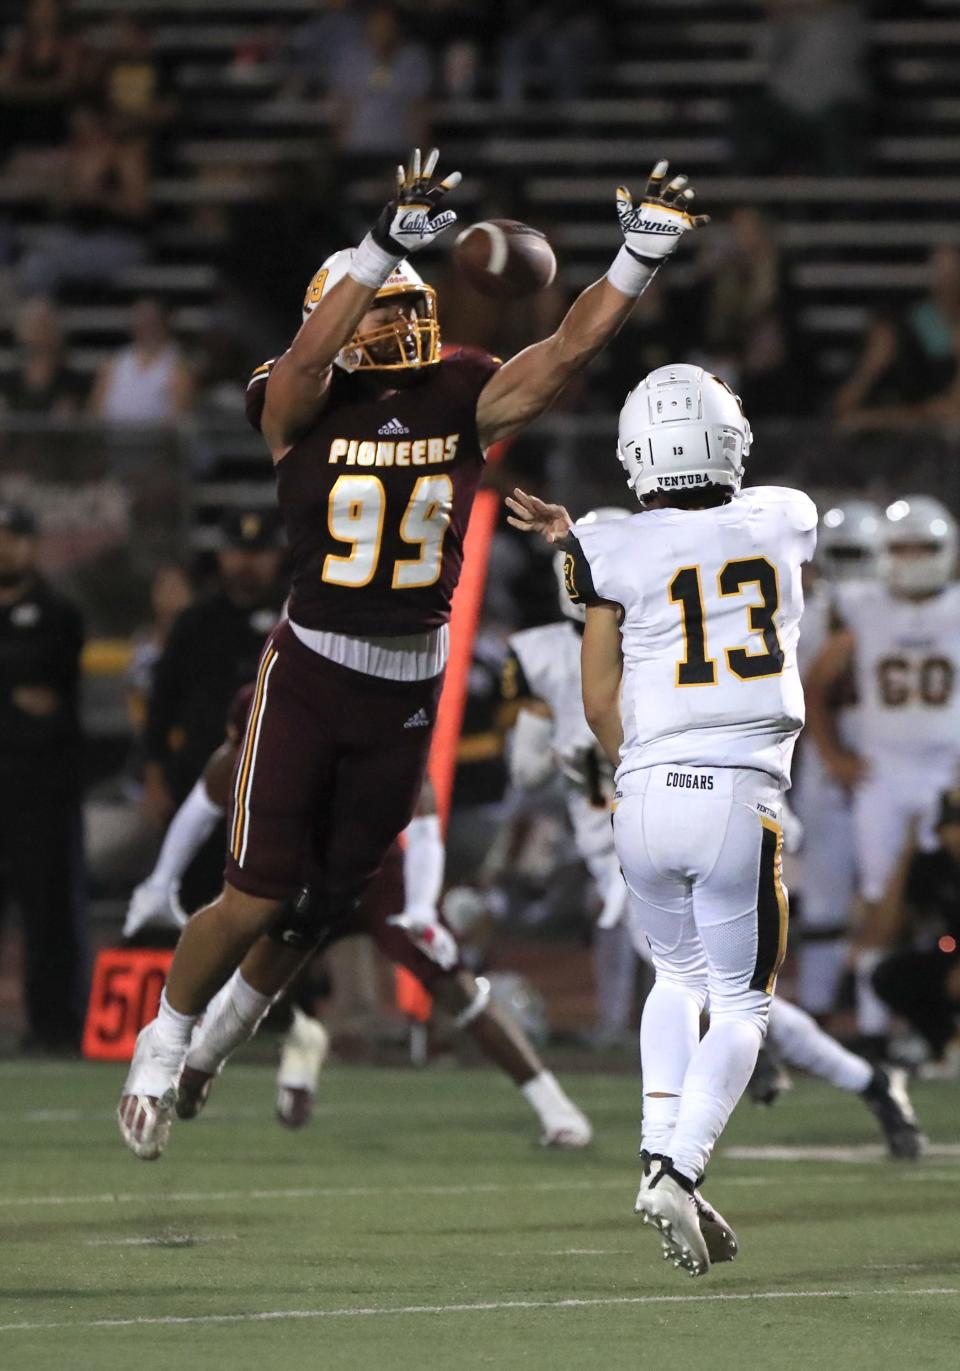 Simi Valley defensive end Carson Mott is sure to have plenty of offers from other colleges after Colorado informed him they would not be honoring his commitment to the university.